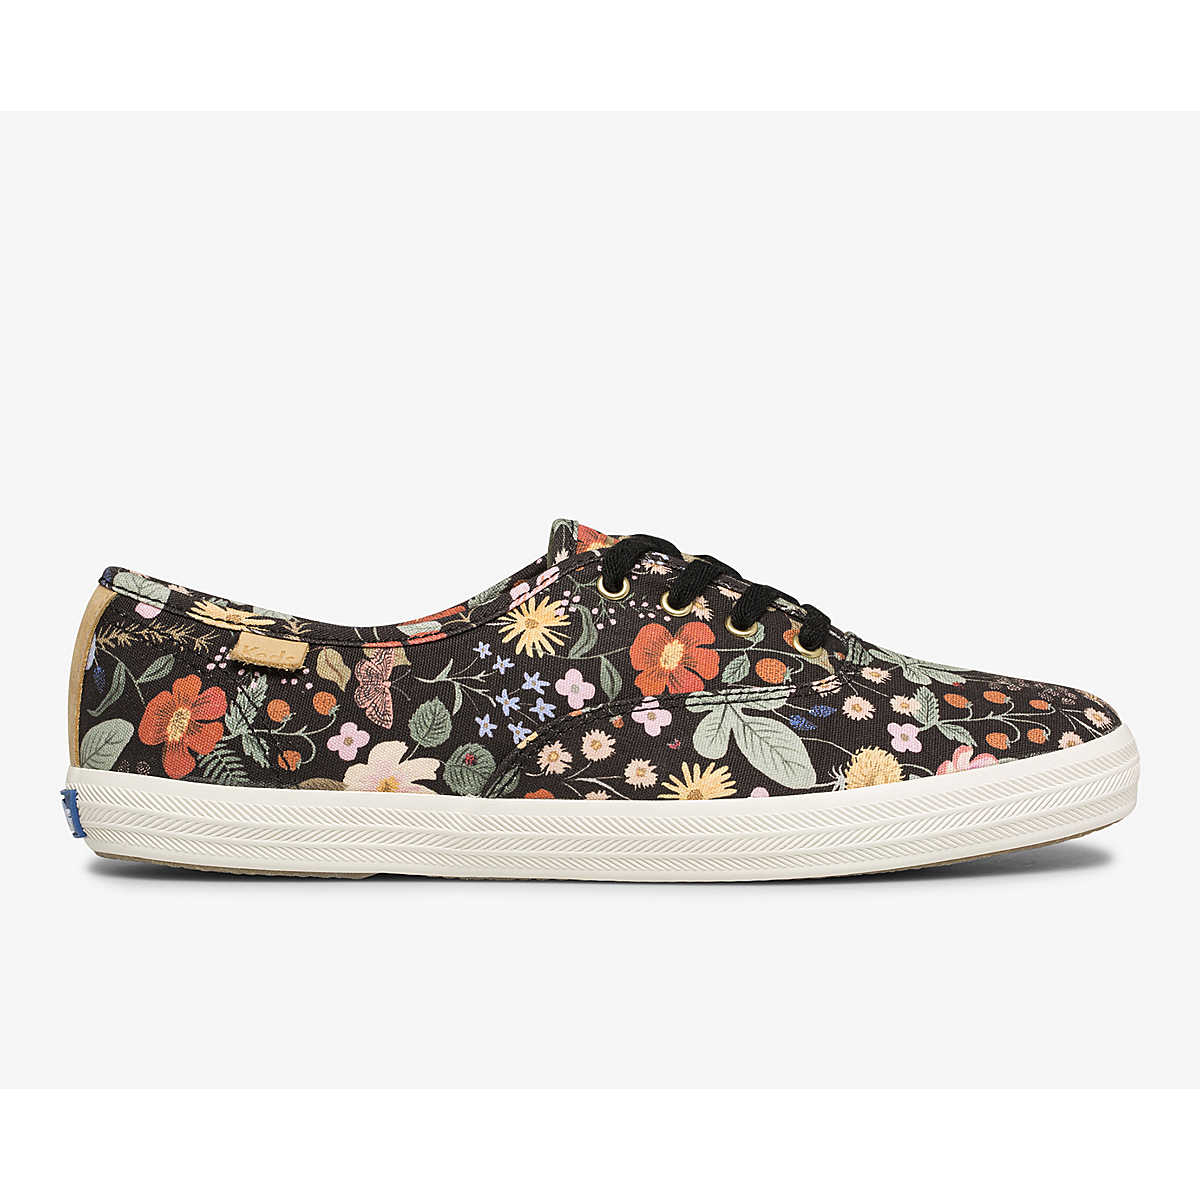 Keds X Rifle Paper Co. Champion Strawberry Fields In Black Multi